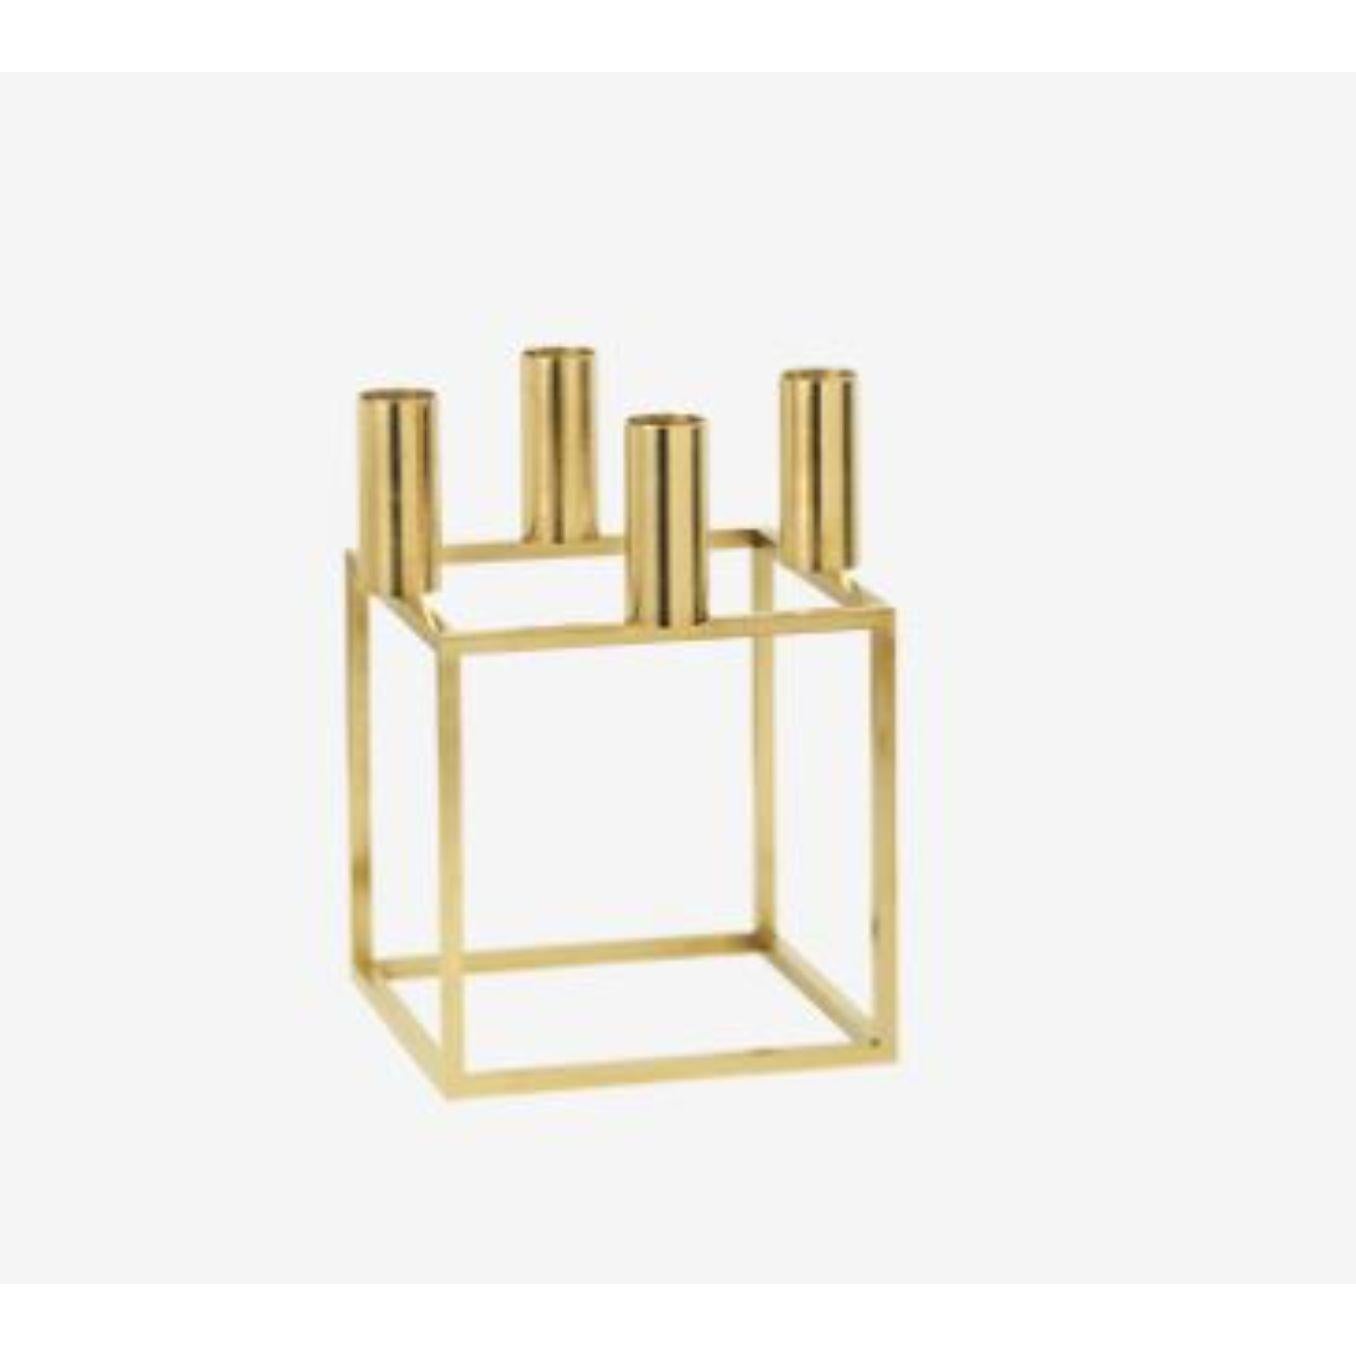 Gold Plated Kubus 4 candle holder by Lassen
Dimensions: D 14 x W 14 x H 20 cm 
Materials: Metal 
Also available in different dimensions. 
Weight: 1.50 Kg

A new small wonder has seen the light of day. Kubus Micro is a stylish, smaller version